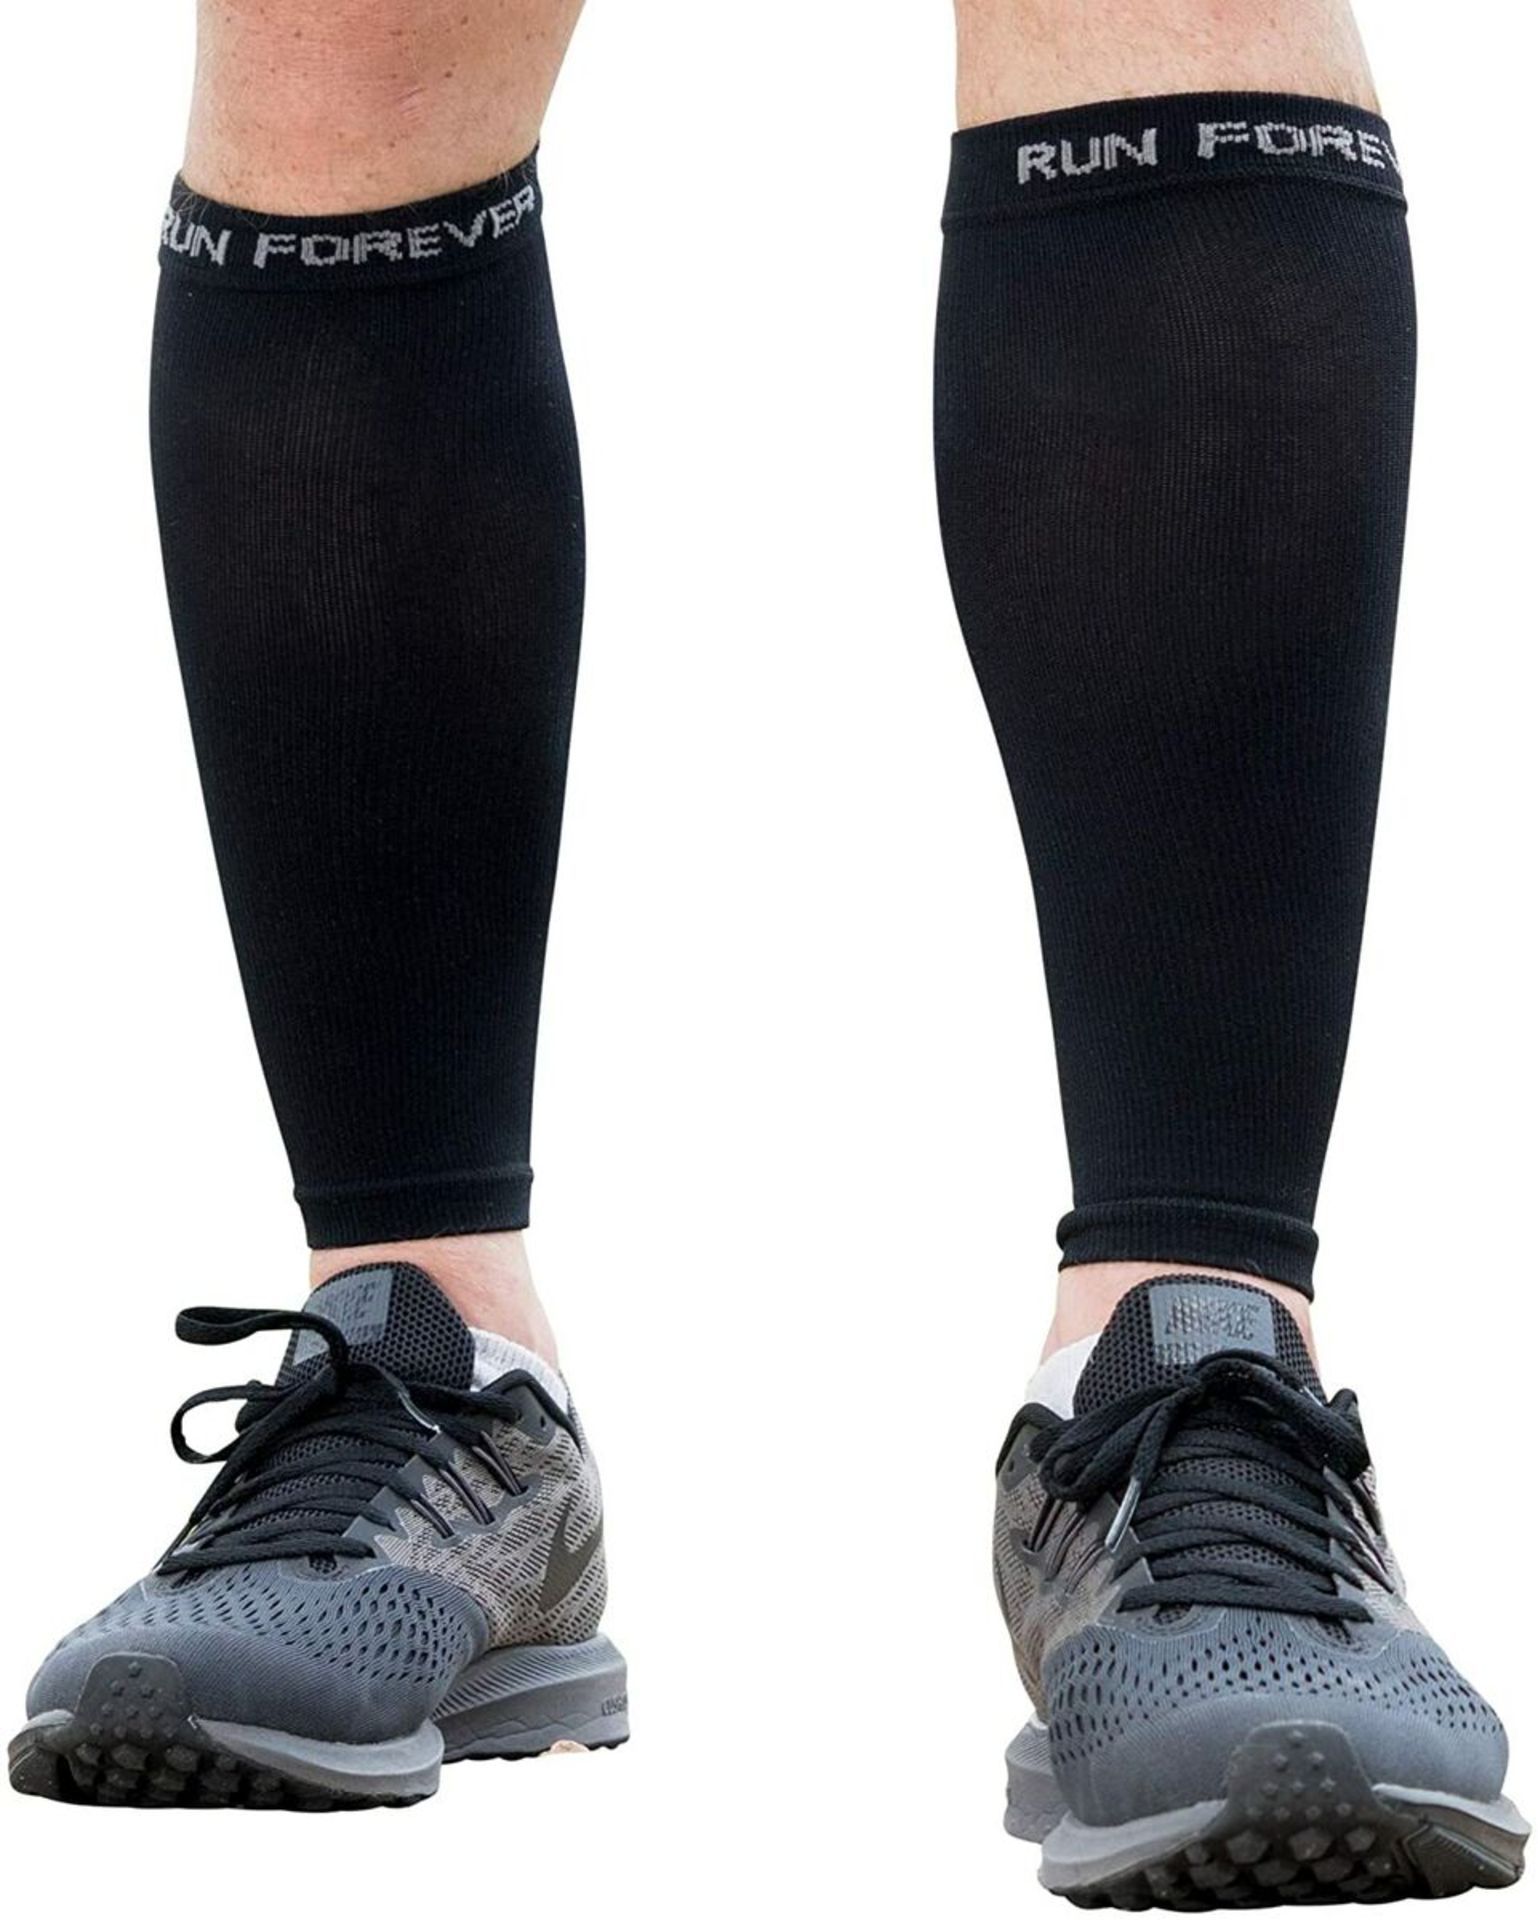 40 X BRAND NEW RUN FOREVER CALF COMPRESSION SLEEVES R15-4